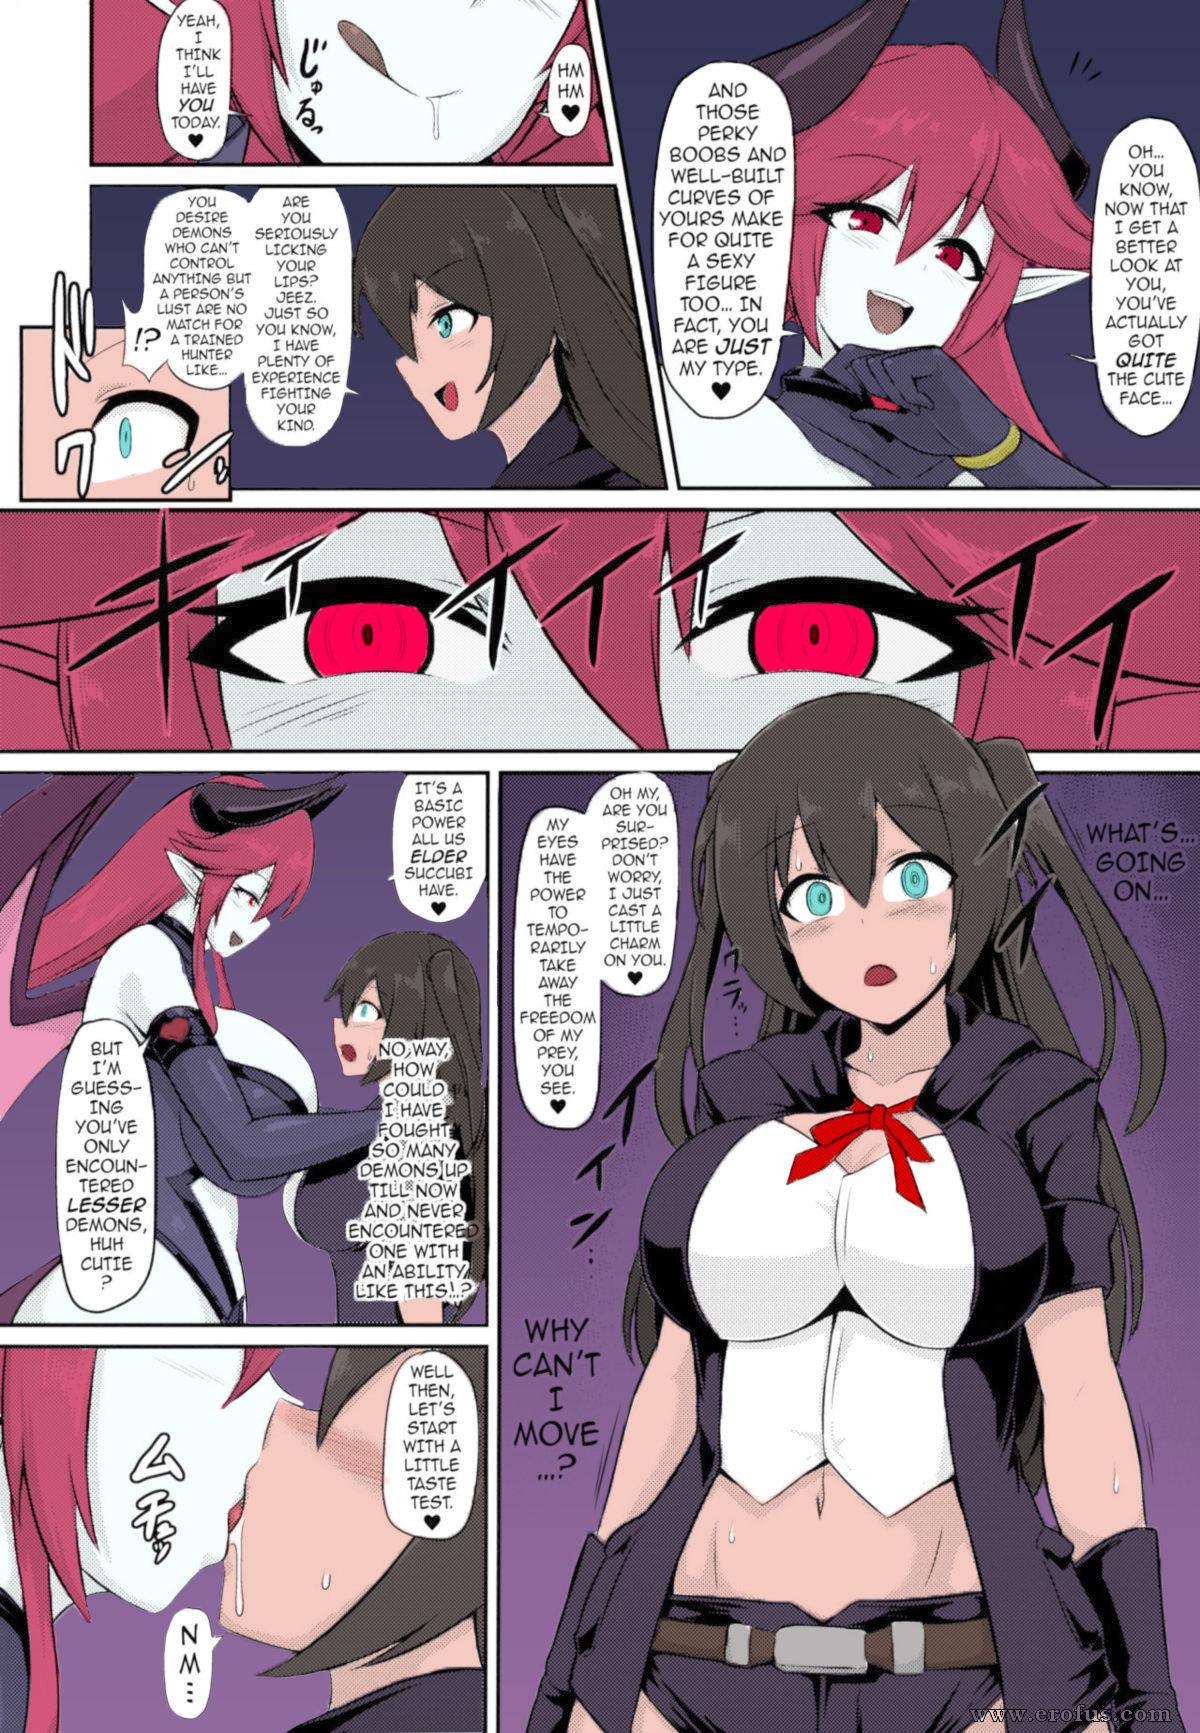 Sapphic Erotica A Lesbian Succubu´s Lust Crest Pleasure Training - COLOR- Ongoing Putaria - Page 3